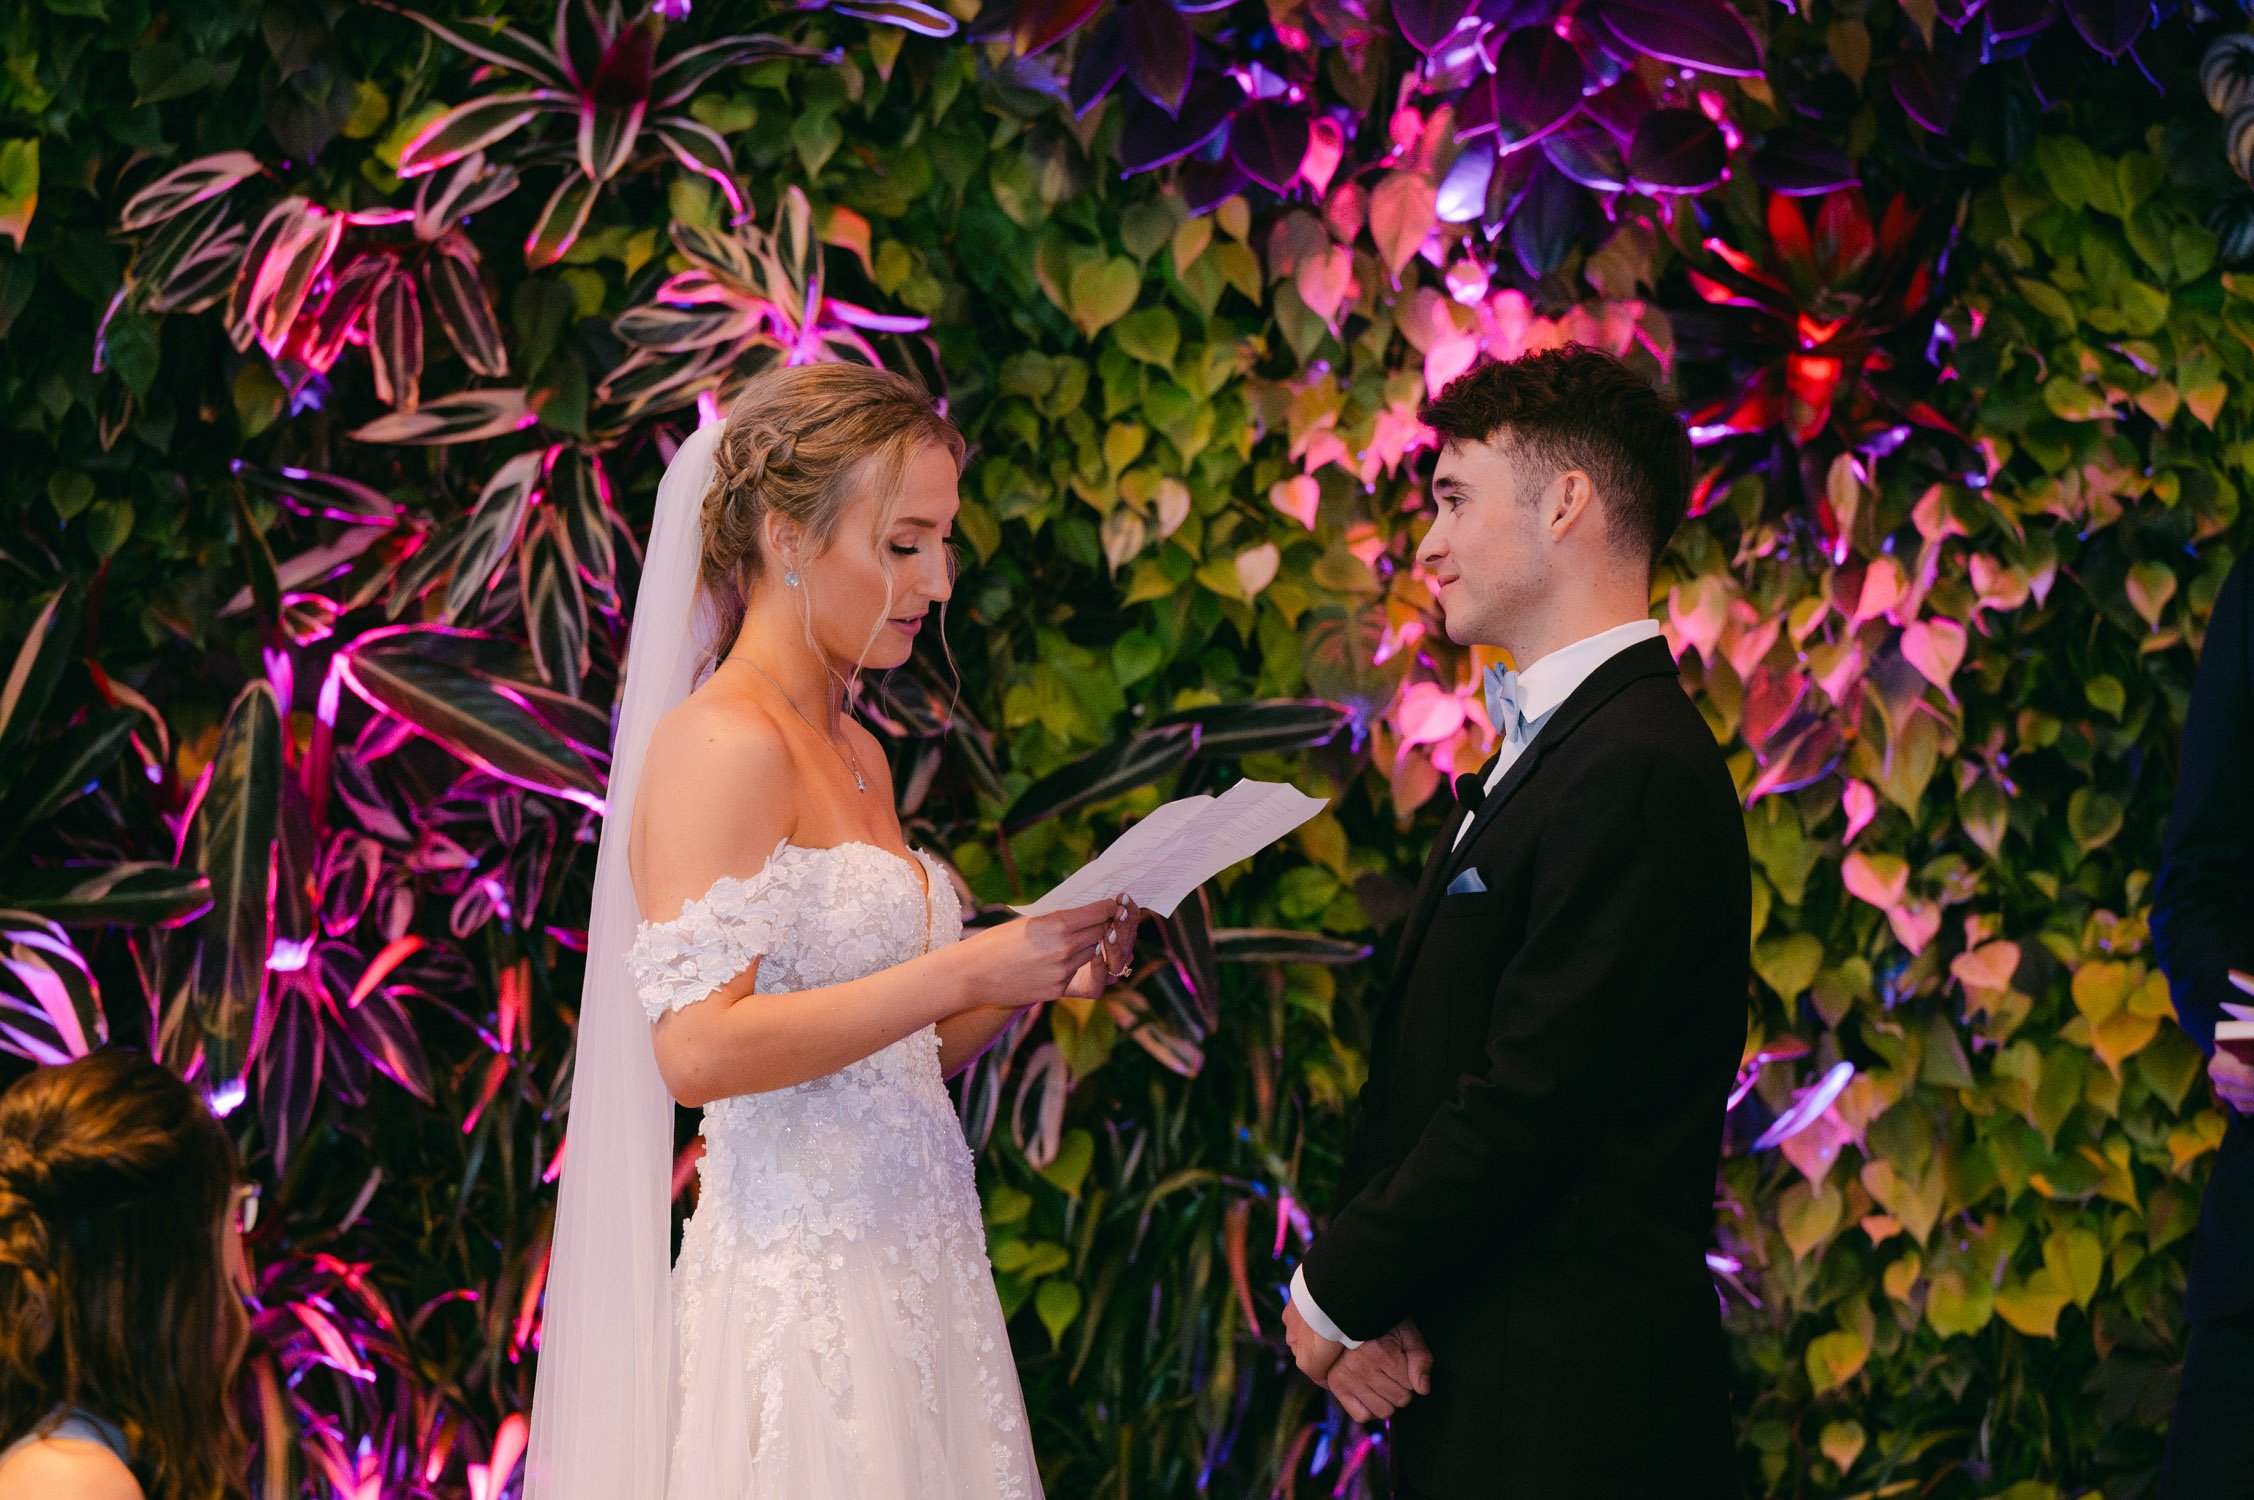 California academy of Sciences in San Francisco Wedding, photo of the bride giving her speech in front of the groom